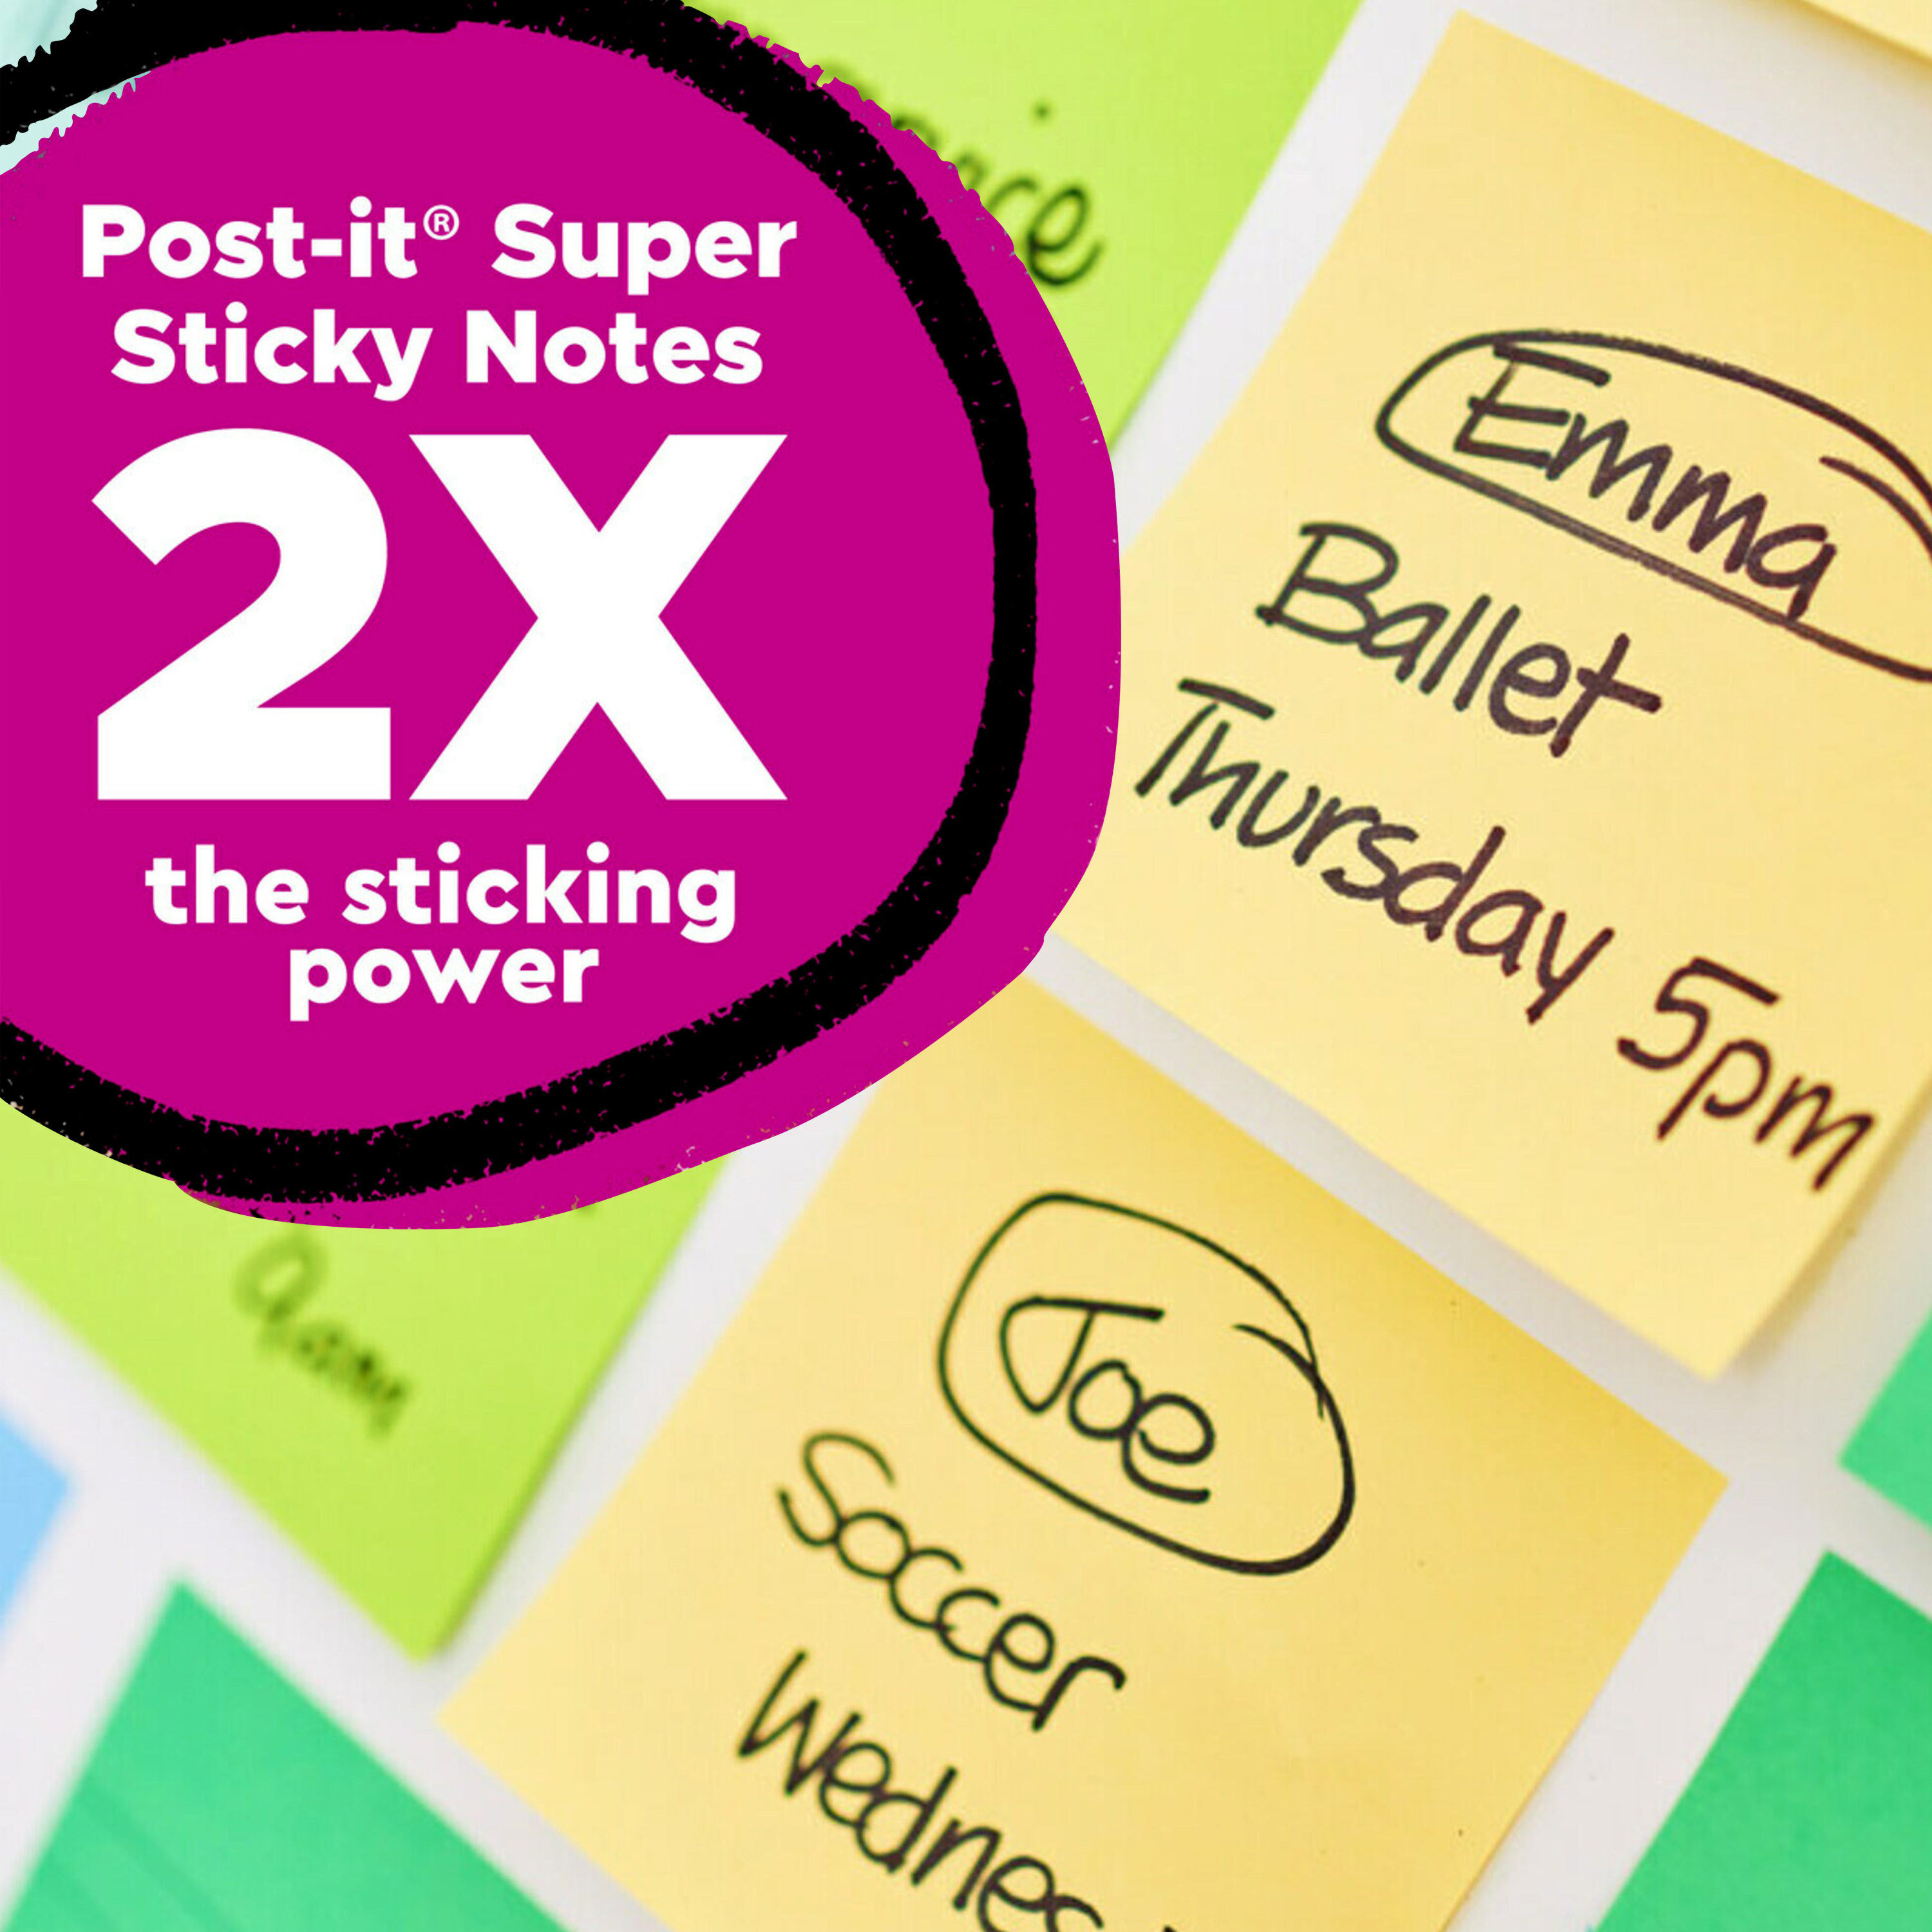 Product Number 655R-12SSCY | Post-it® Super Sticky Recycled Notes 655R-12SSCY